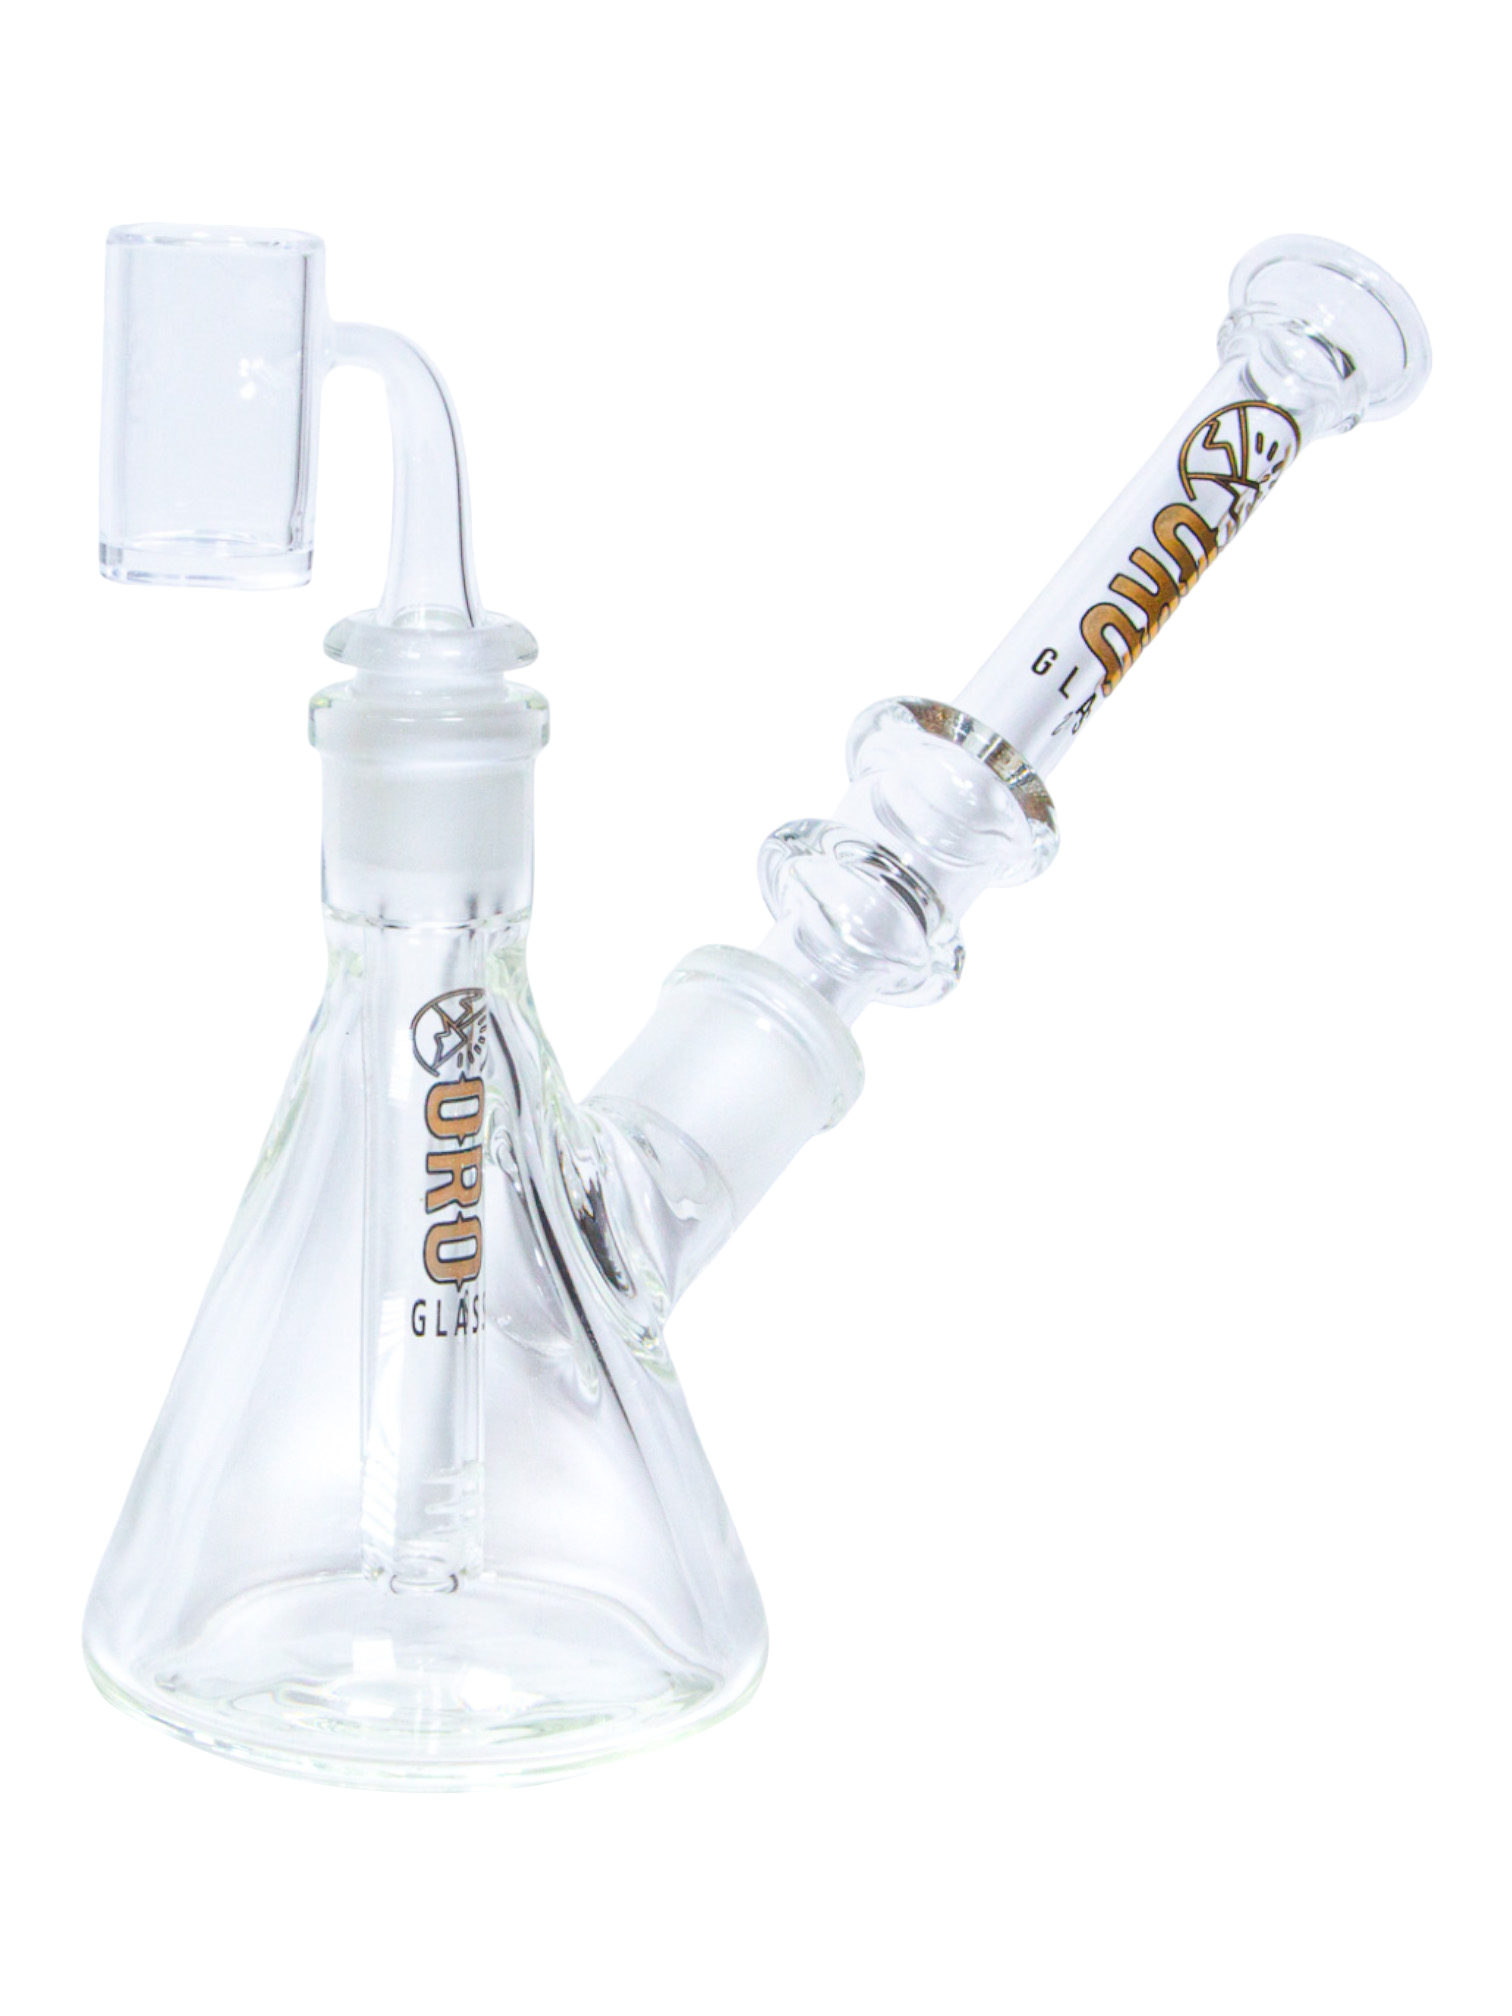 An Oro Glass Company Highbanker Modular Water Pipe set up as a dab rig.